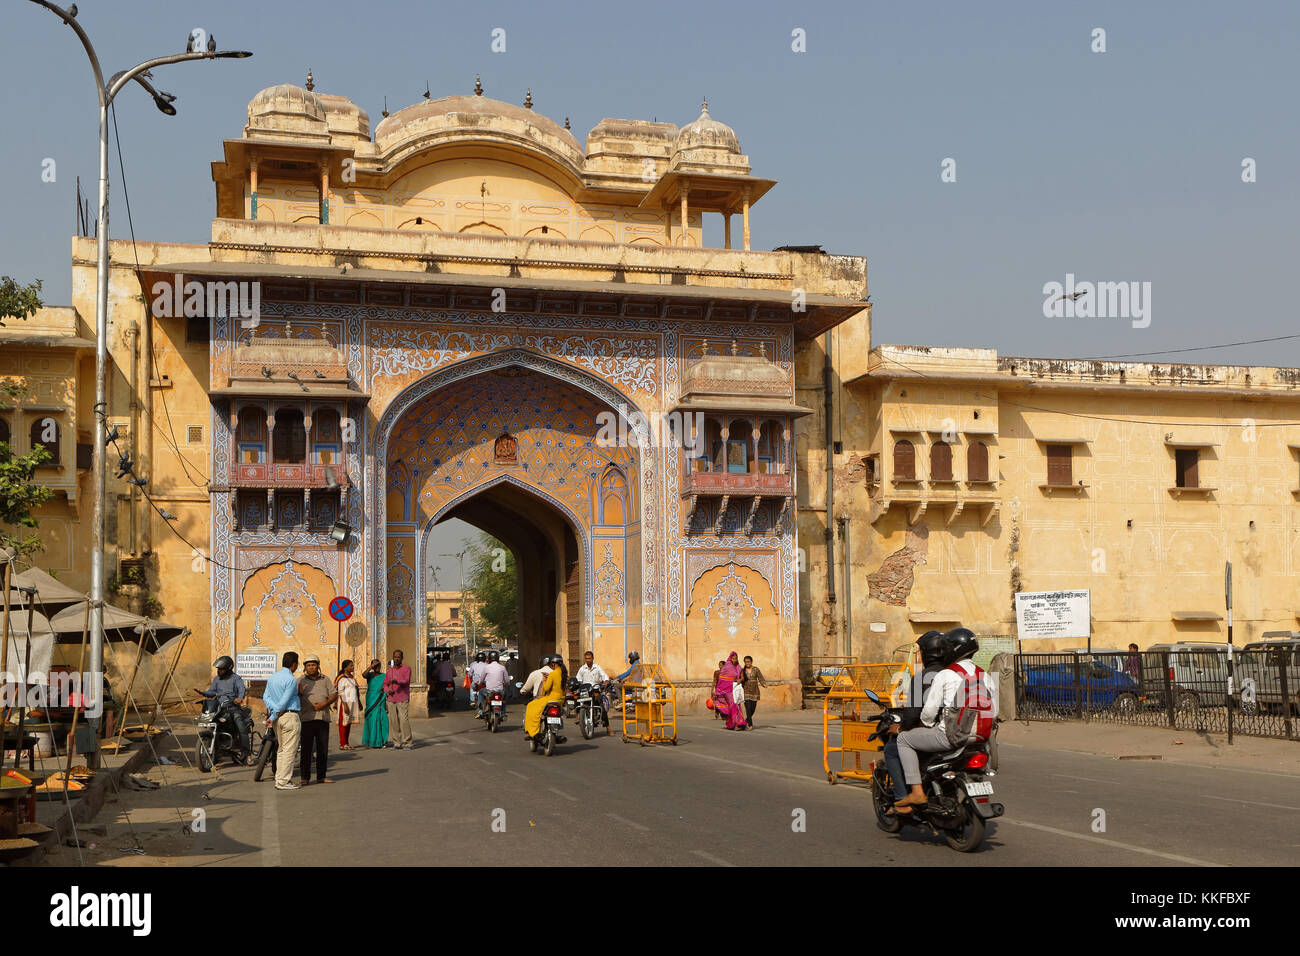 JAIPUR, INDIA, October 26, 2017 : A door of the city. Jaipur is a popular tourist destination in India and serves as a gateway to other tourist destin Stock Photo